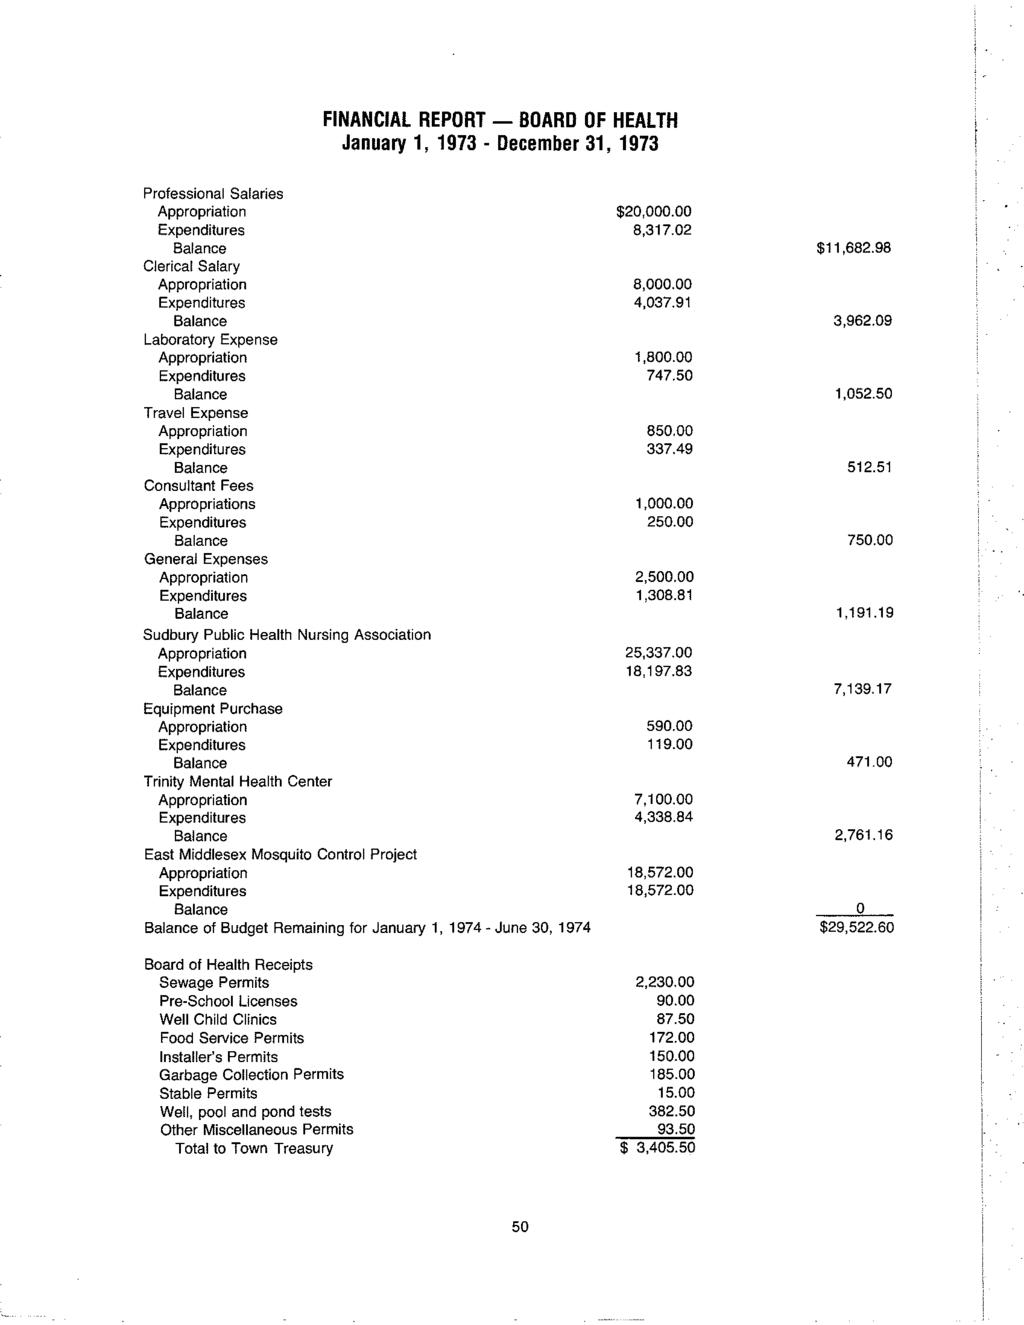 FINANCIAL REPORT- BOARD OF HEALTH January 1, 1973 - December 31, 1973 Professional Salaries Appropriation Expenditures Balance Clerical Salary Appropriation Expenditures Balance Laboratory Expense